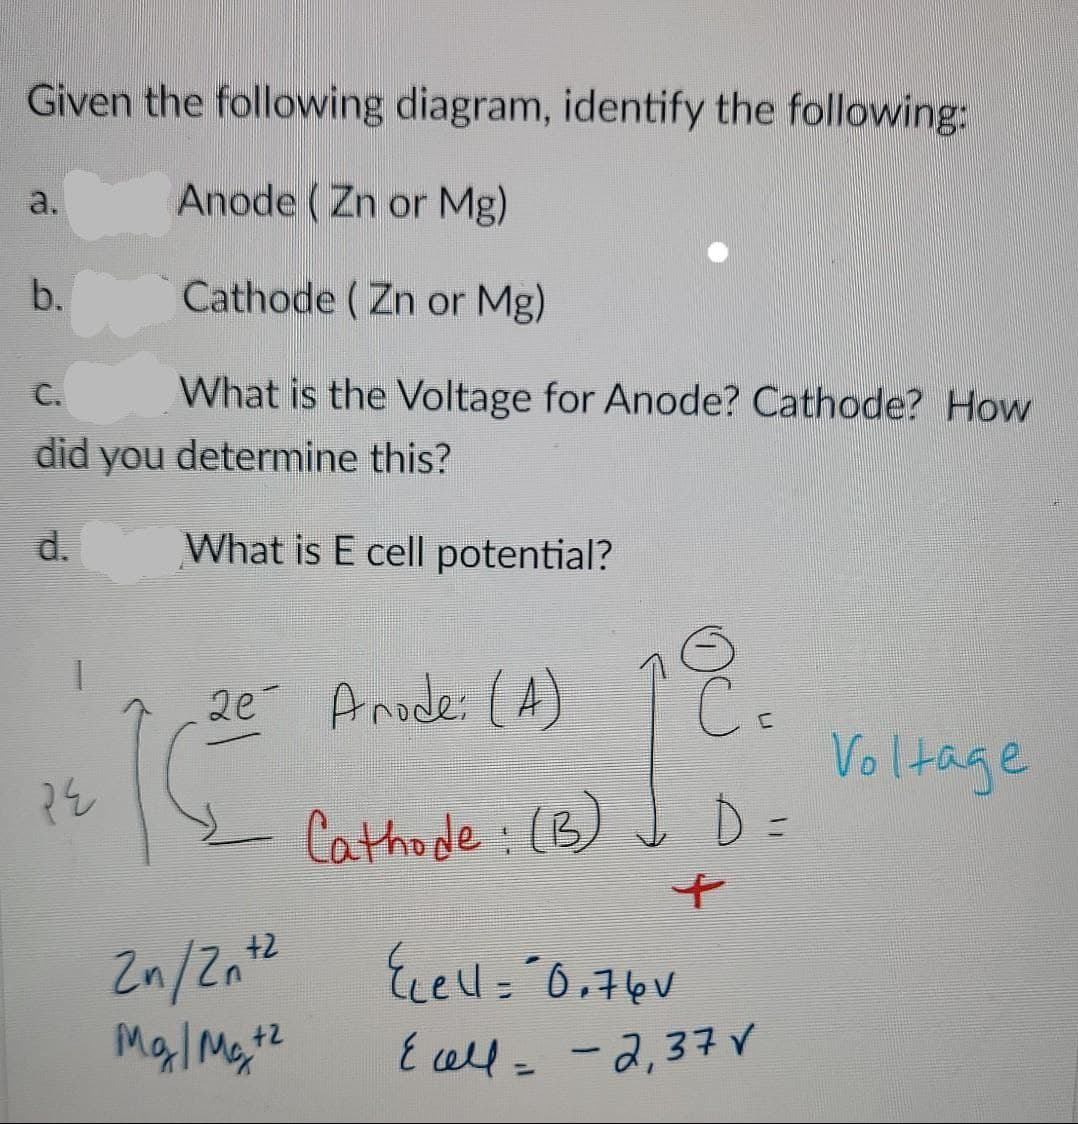 Given the following diagram, identify the following:
Anode (Zn or Mg)
b.
Cathode (Zn or Mg)
C.
What is the Voltage for Anode? Cathode? How
did you determine this?
What is E cell potential?
2e Anode: (A)
C
Voltage
PE
1²²
2n/2n+2
Mg|Mat2
Cathode: (B)
+
Ecell="0.760
E all= -2,37 V
=